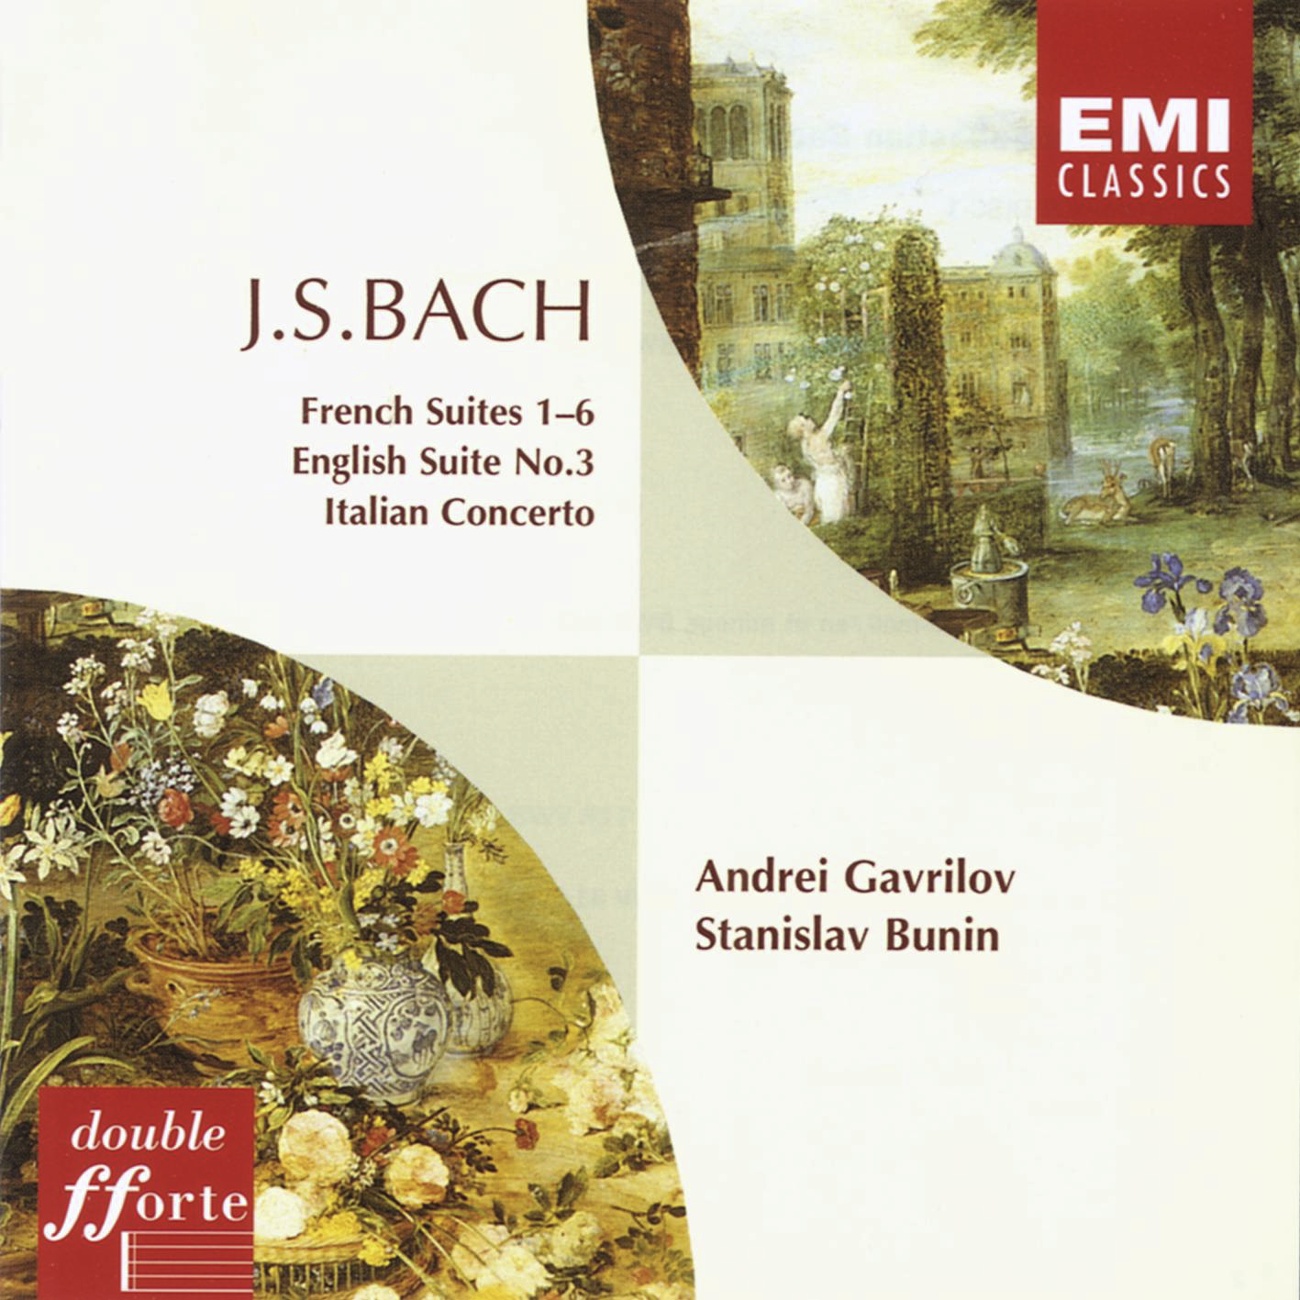 FRENCH SUITE 3 IN B-MIN, BWV 814:IV. ANGLAISE